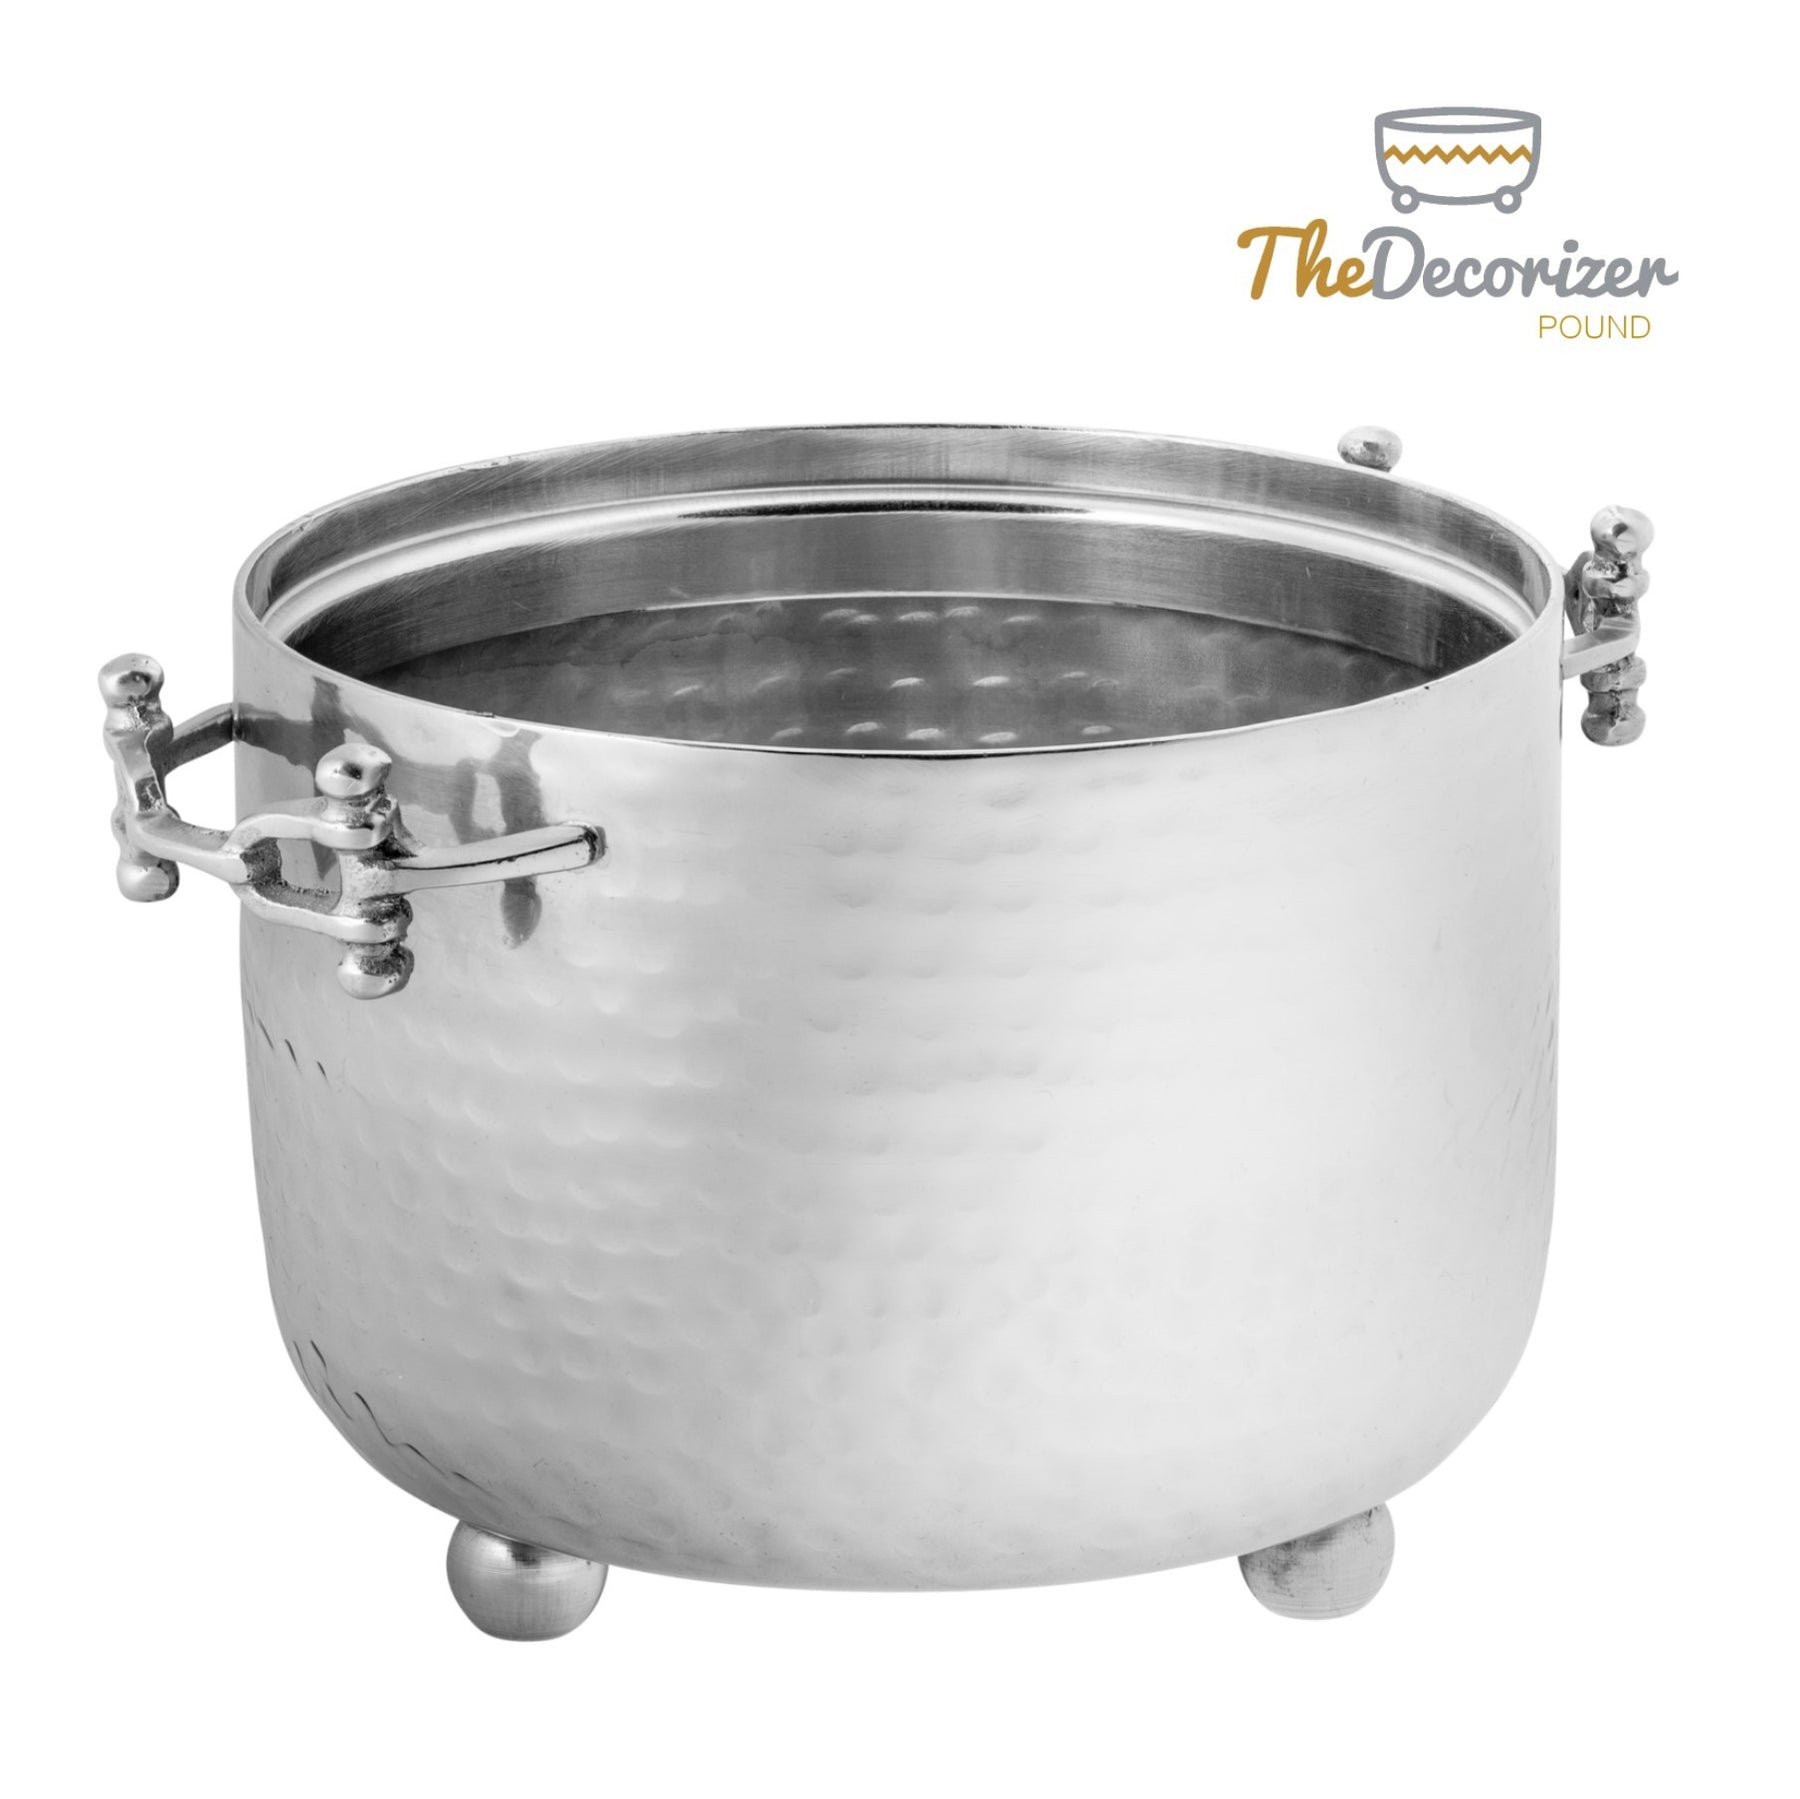 The Decorizer 1/2 Pound Hammered Dip Container Holder With Buckle / Handle - Silver